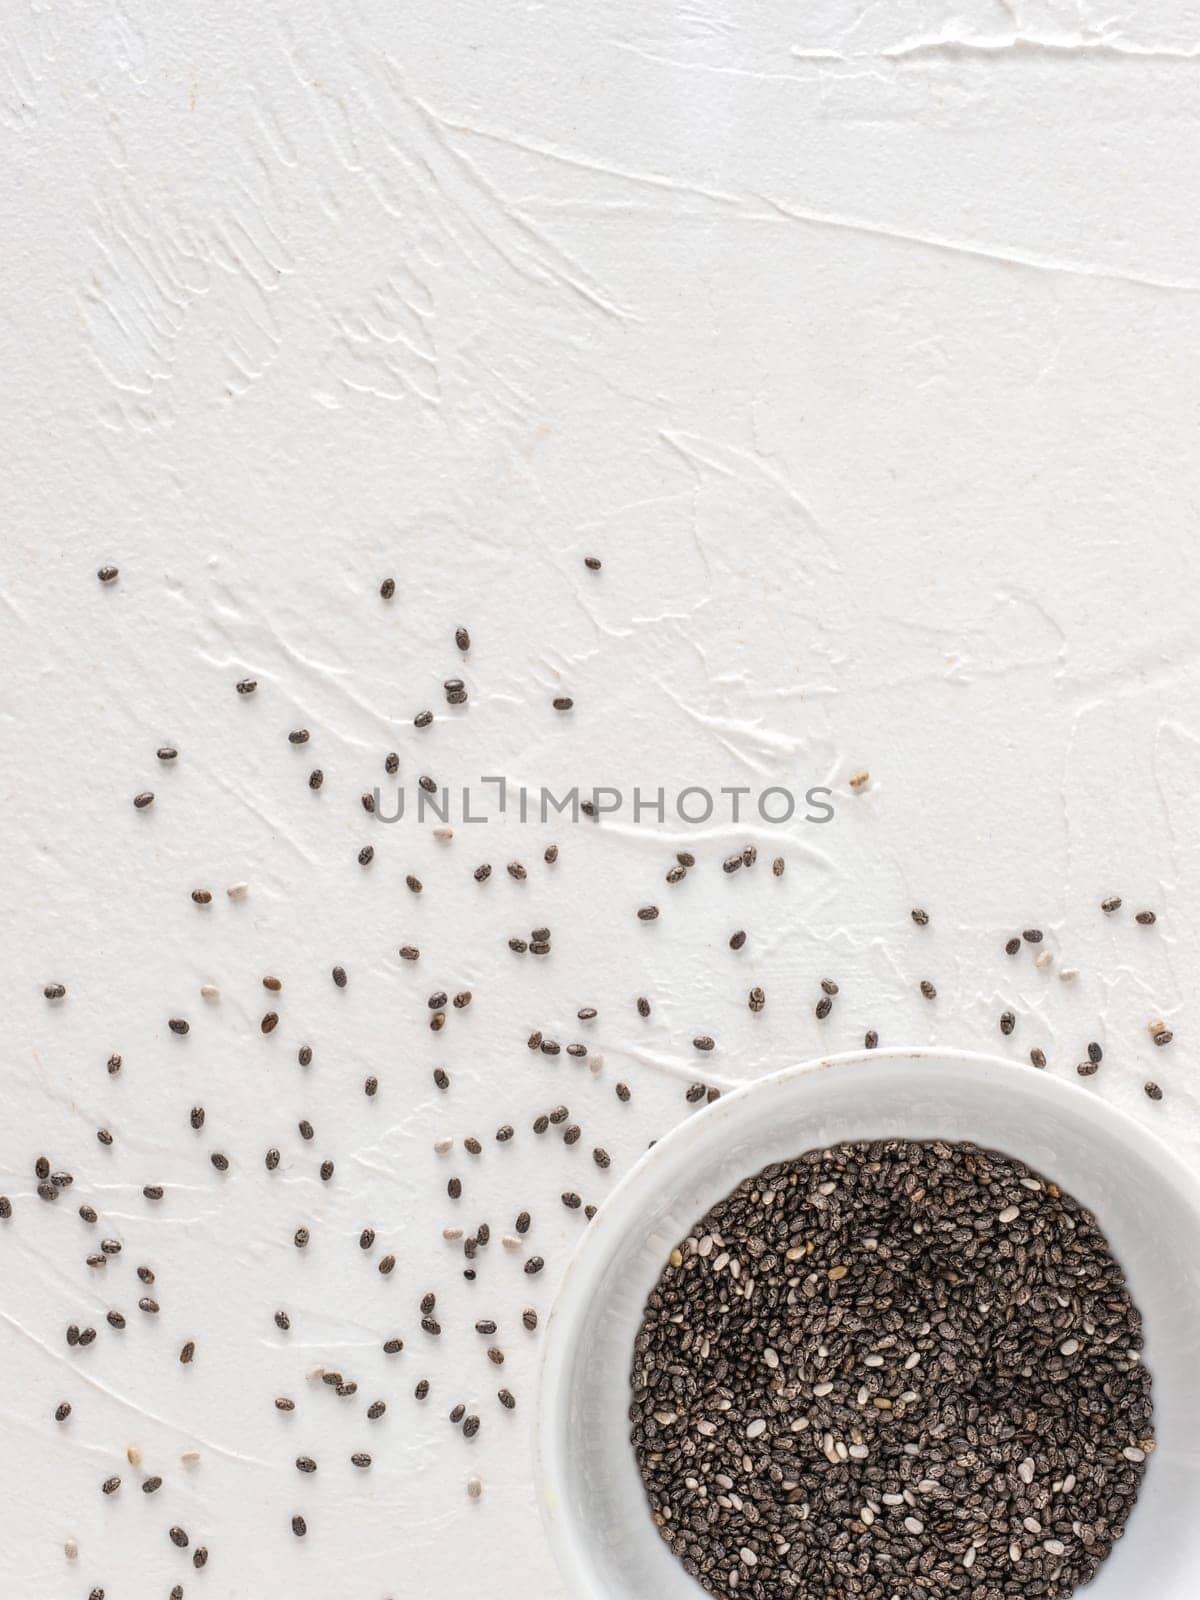 Chia seeds with copy space by fascinadora